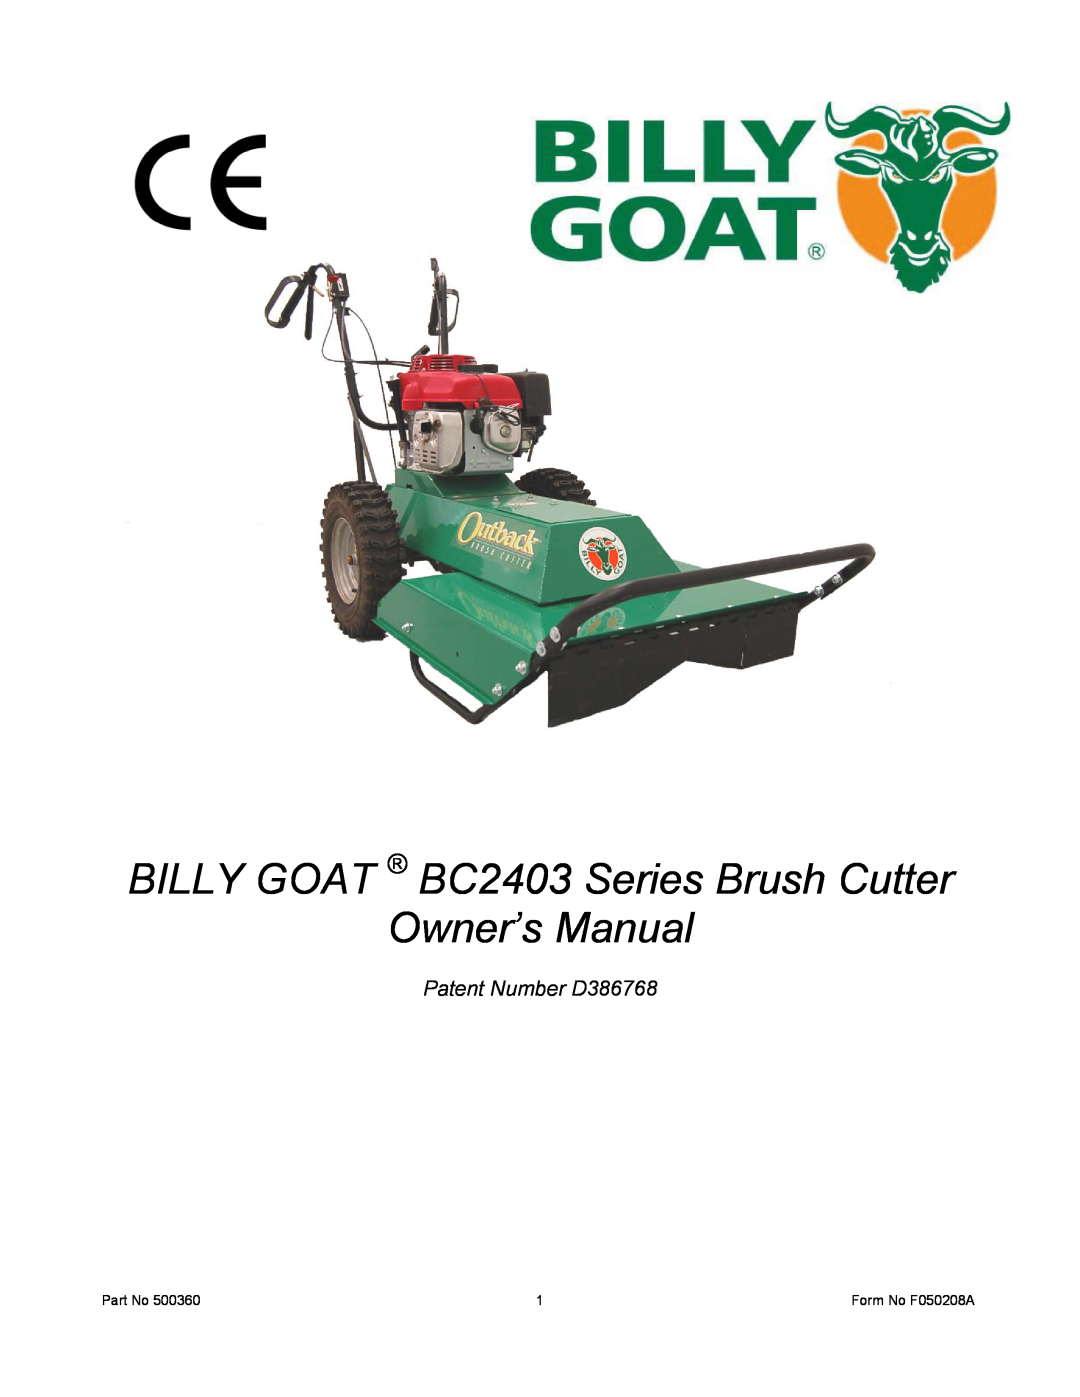 Billy Goat BC2403 Series owner manual Patent Number D386768 